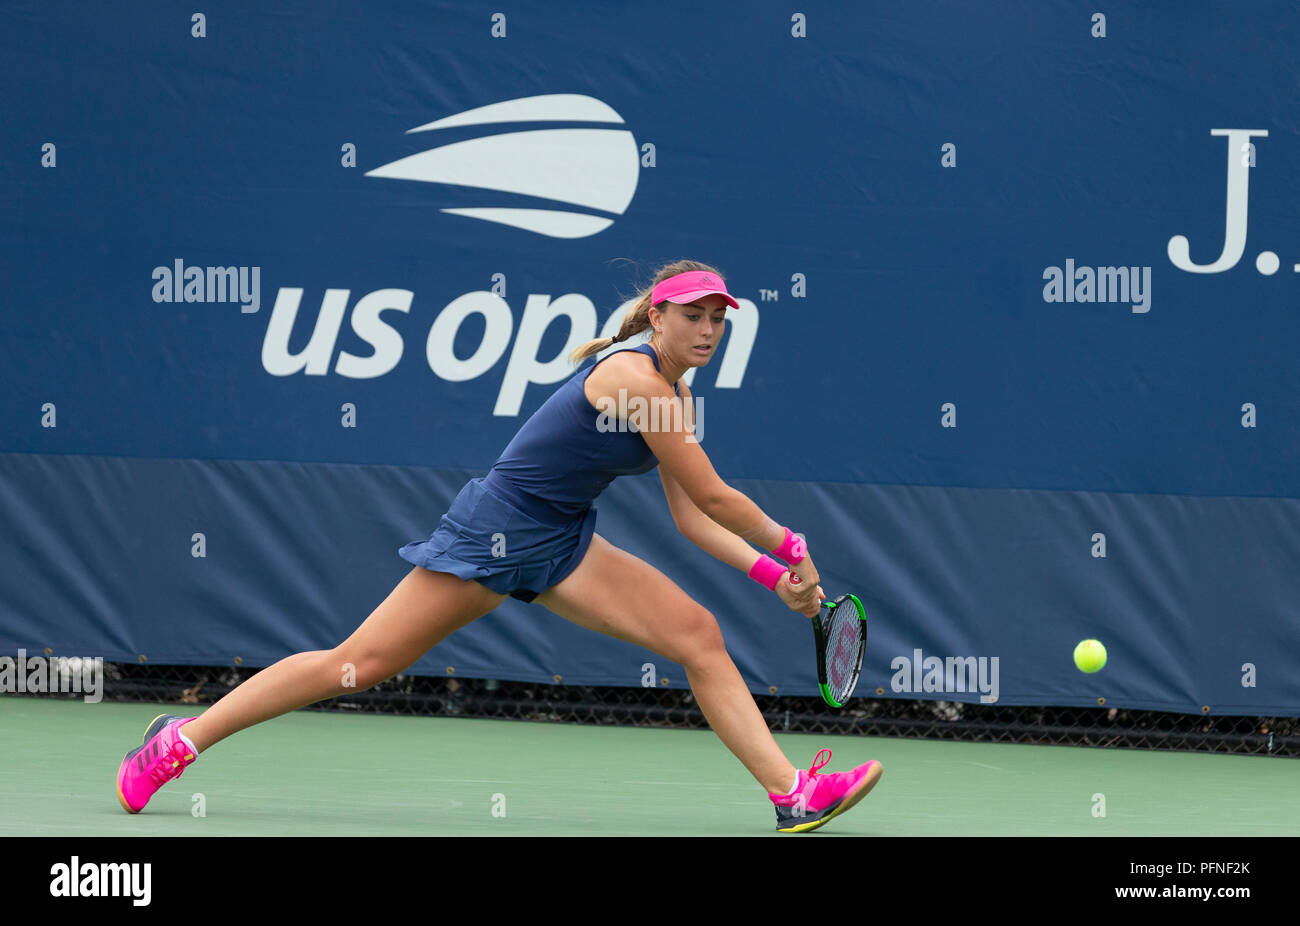 New York, NY - August 21, 2018: Paula Badosa Gibert of Spain retruns ball during qualifying day 1 against Sophie Chang of USA at US Open Tennis championship at USTA Billie Jean King National Tennis Center Credit: lev radin/Alamy Live News Stock Photo